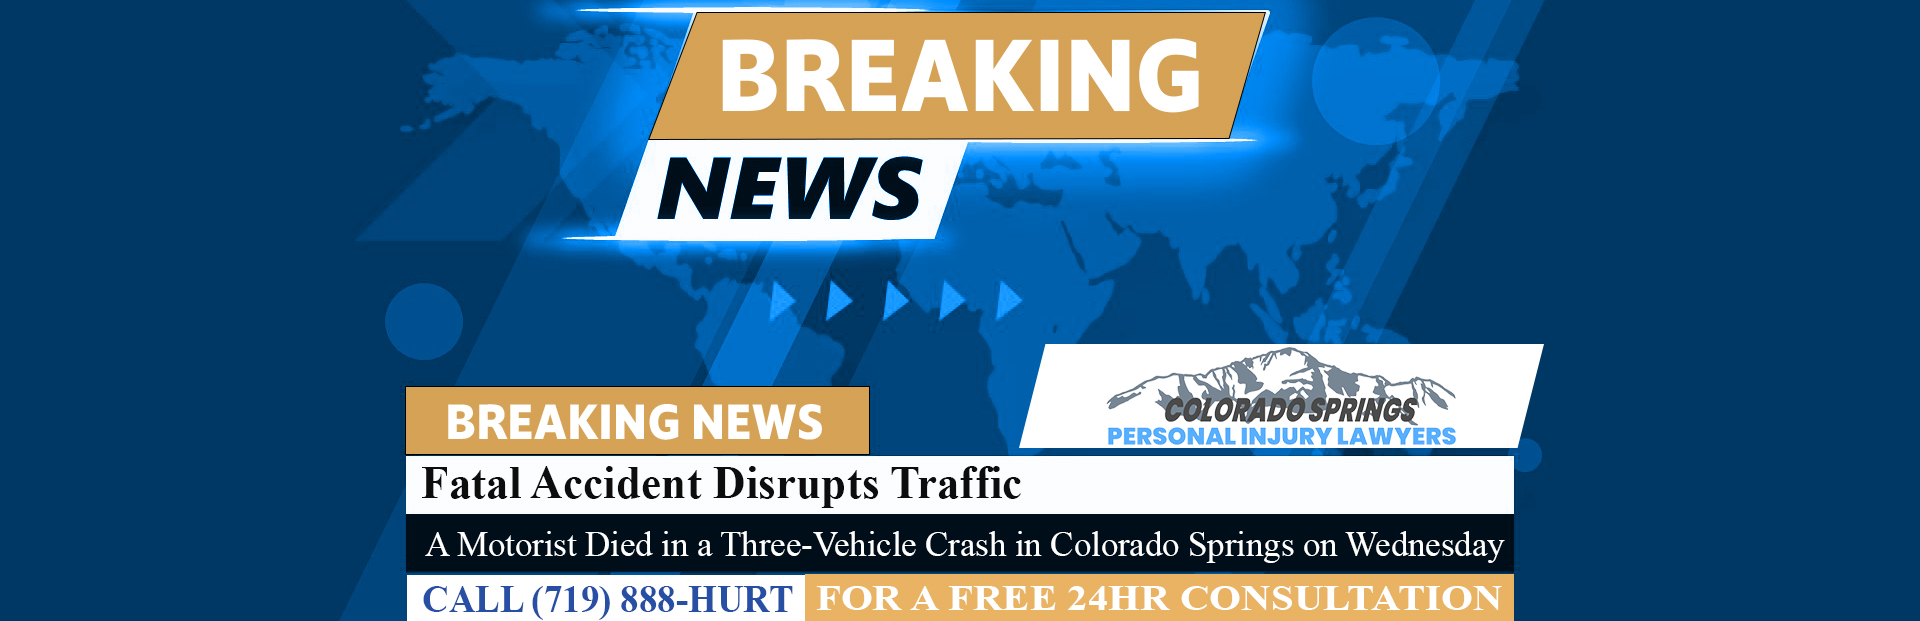 [09-09-23] Fatal Accident in Colorado Springs Disrupts Traffic as Investigations Continue